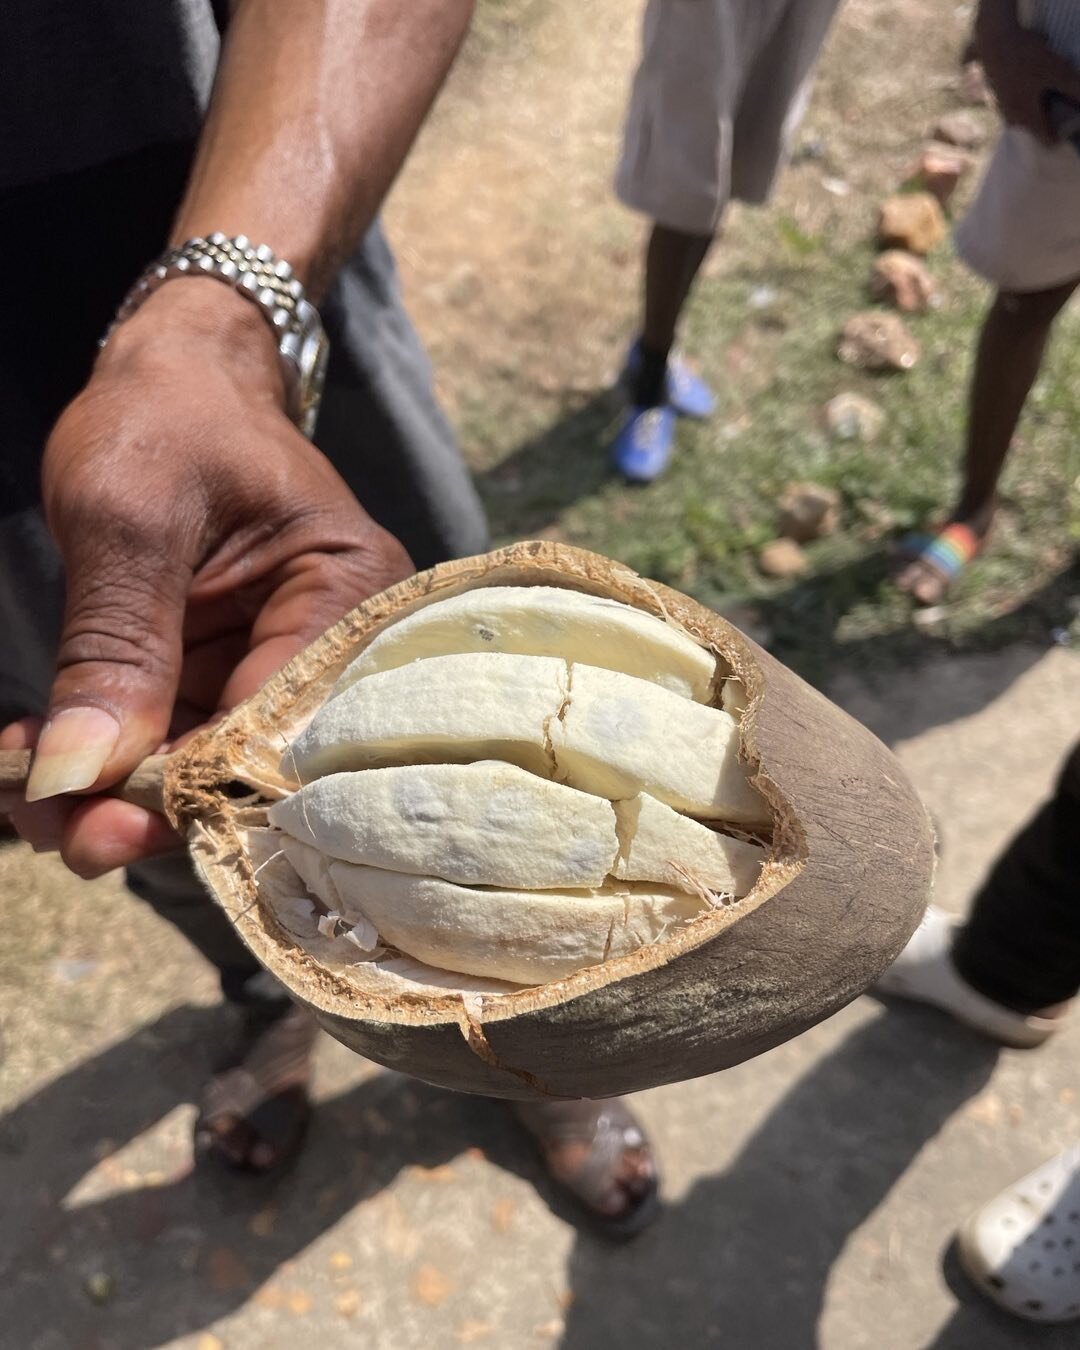 The white powder from the fruit of the Baobab tree has a citrus flavor with high vitamin C content along with calcium and antioxidants. In June and July we anticipate substantial plantings from our school nurseries of Baobab trees.
Savannah Rising🌳?